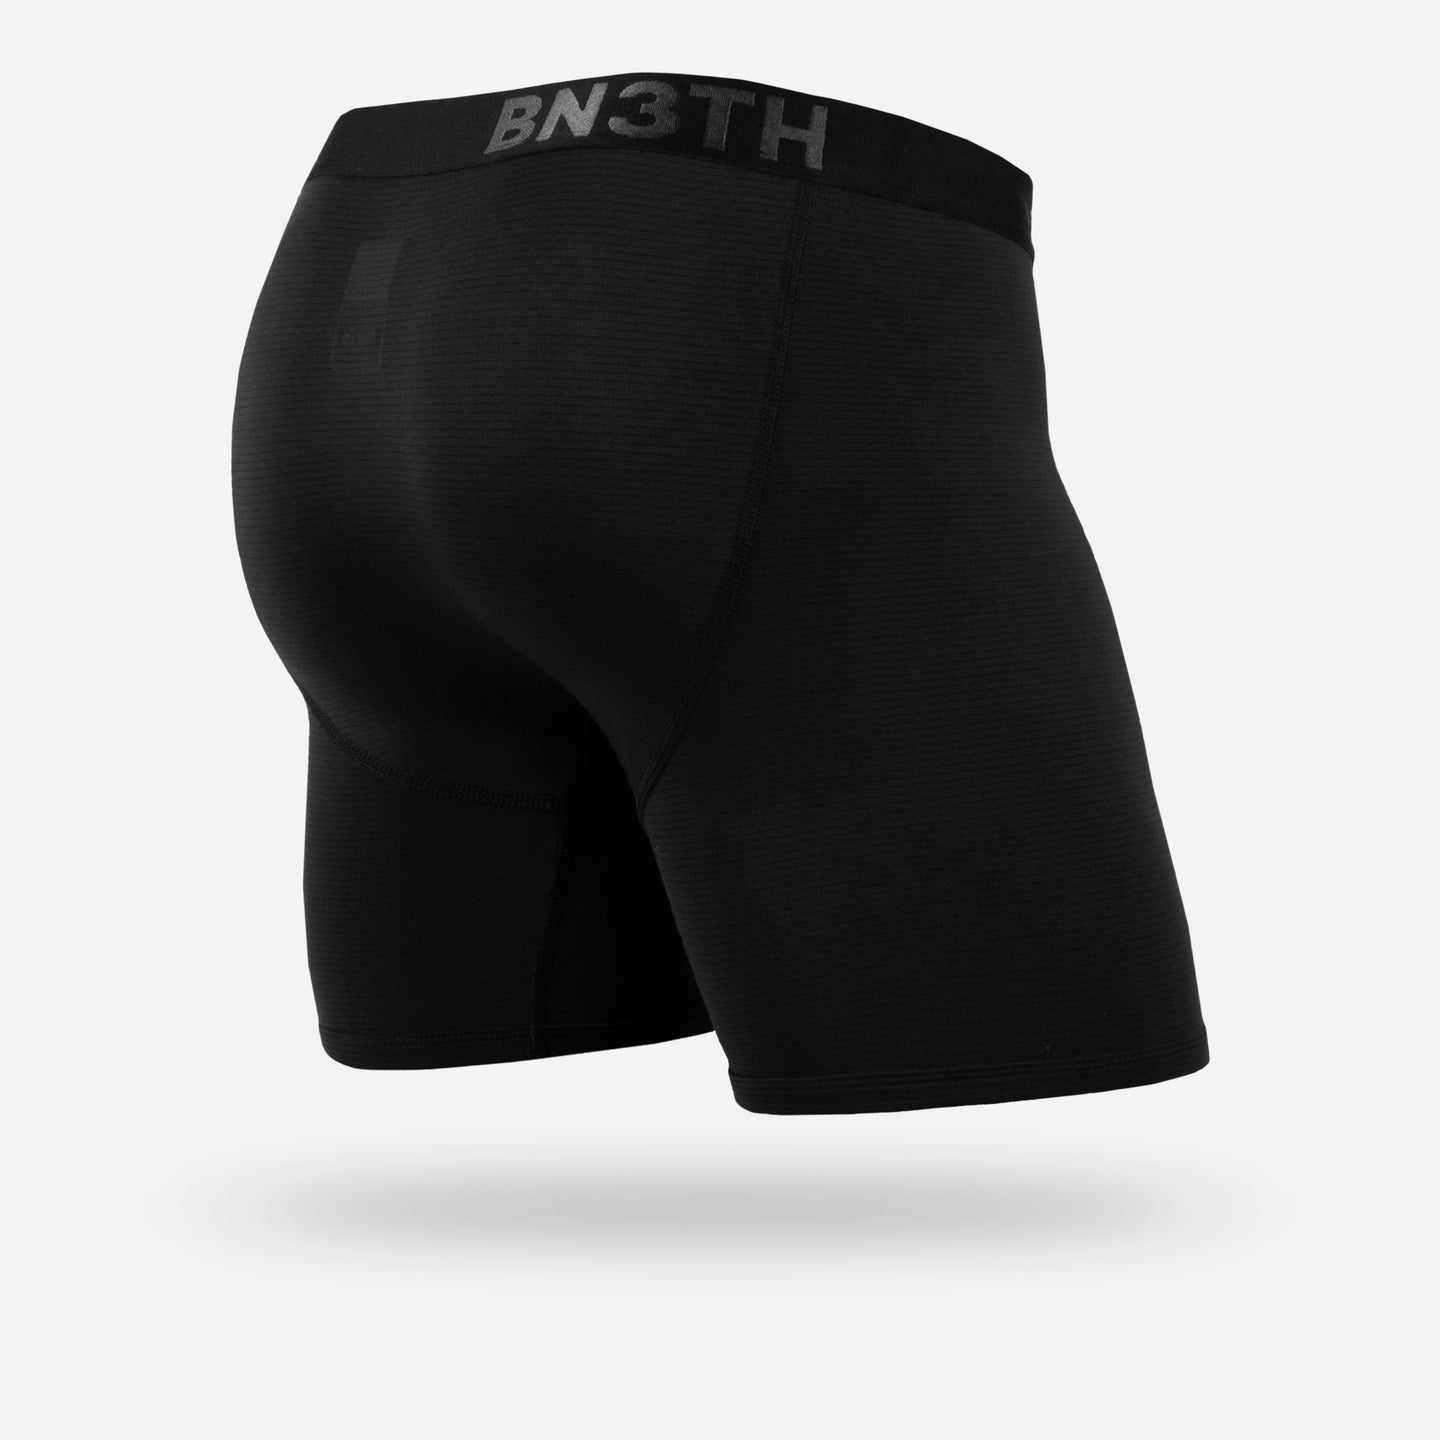 B3NTH PRO with Ionic+ Boxer Brief